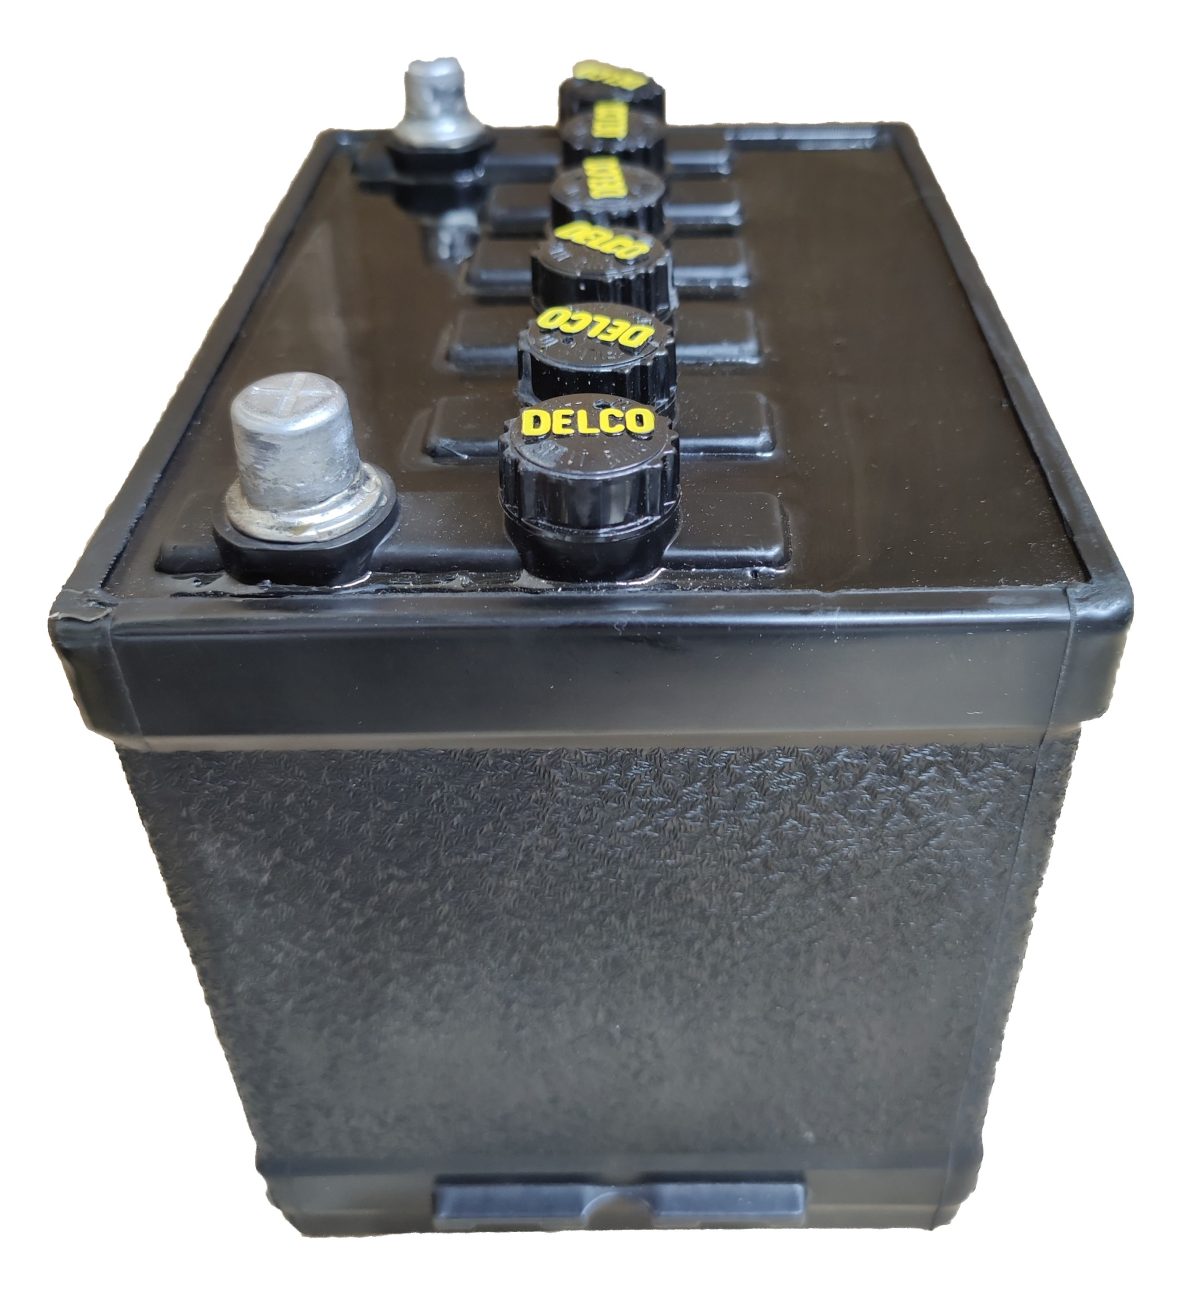 Delco Group 22D Battery Side with Black Caps and Yellow Letters